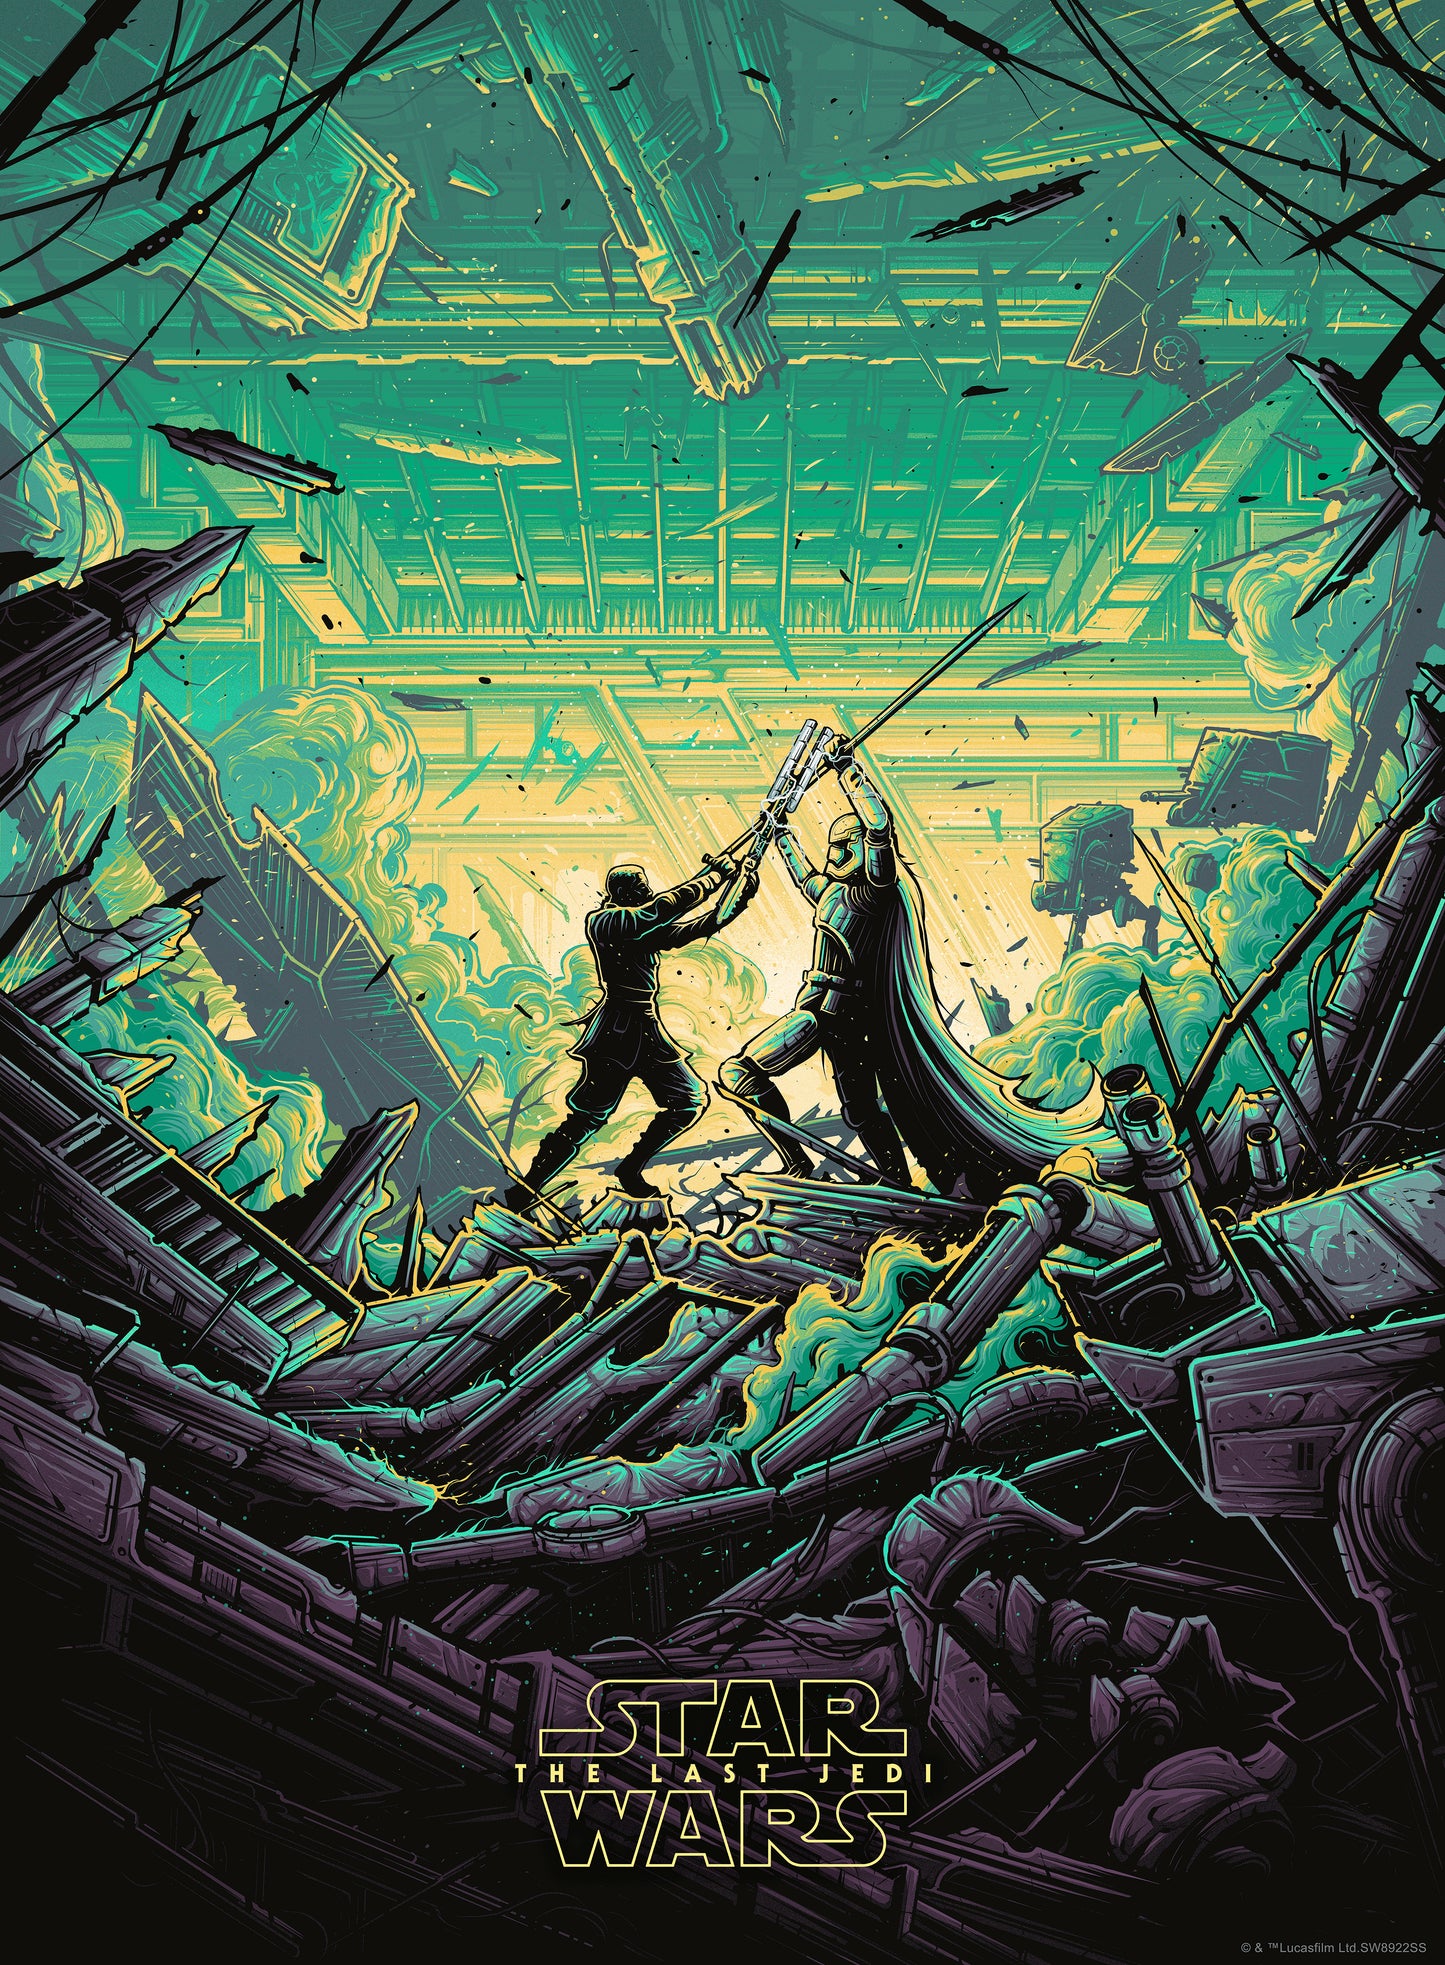 Dan Mumford "Something to Fight For" Variant